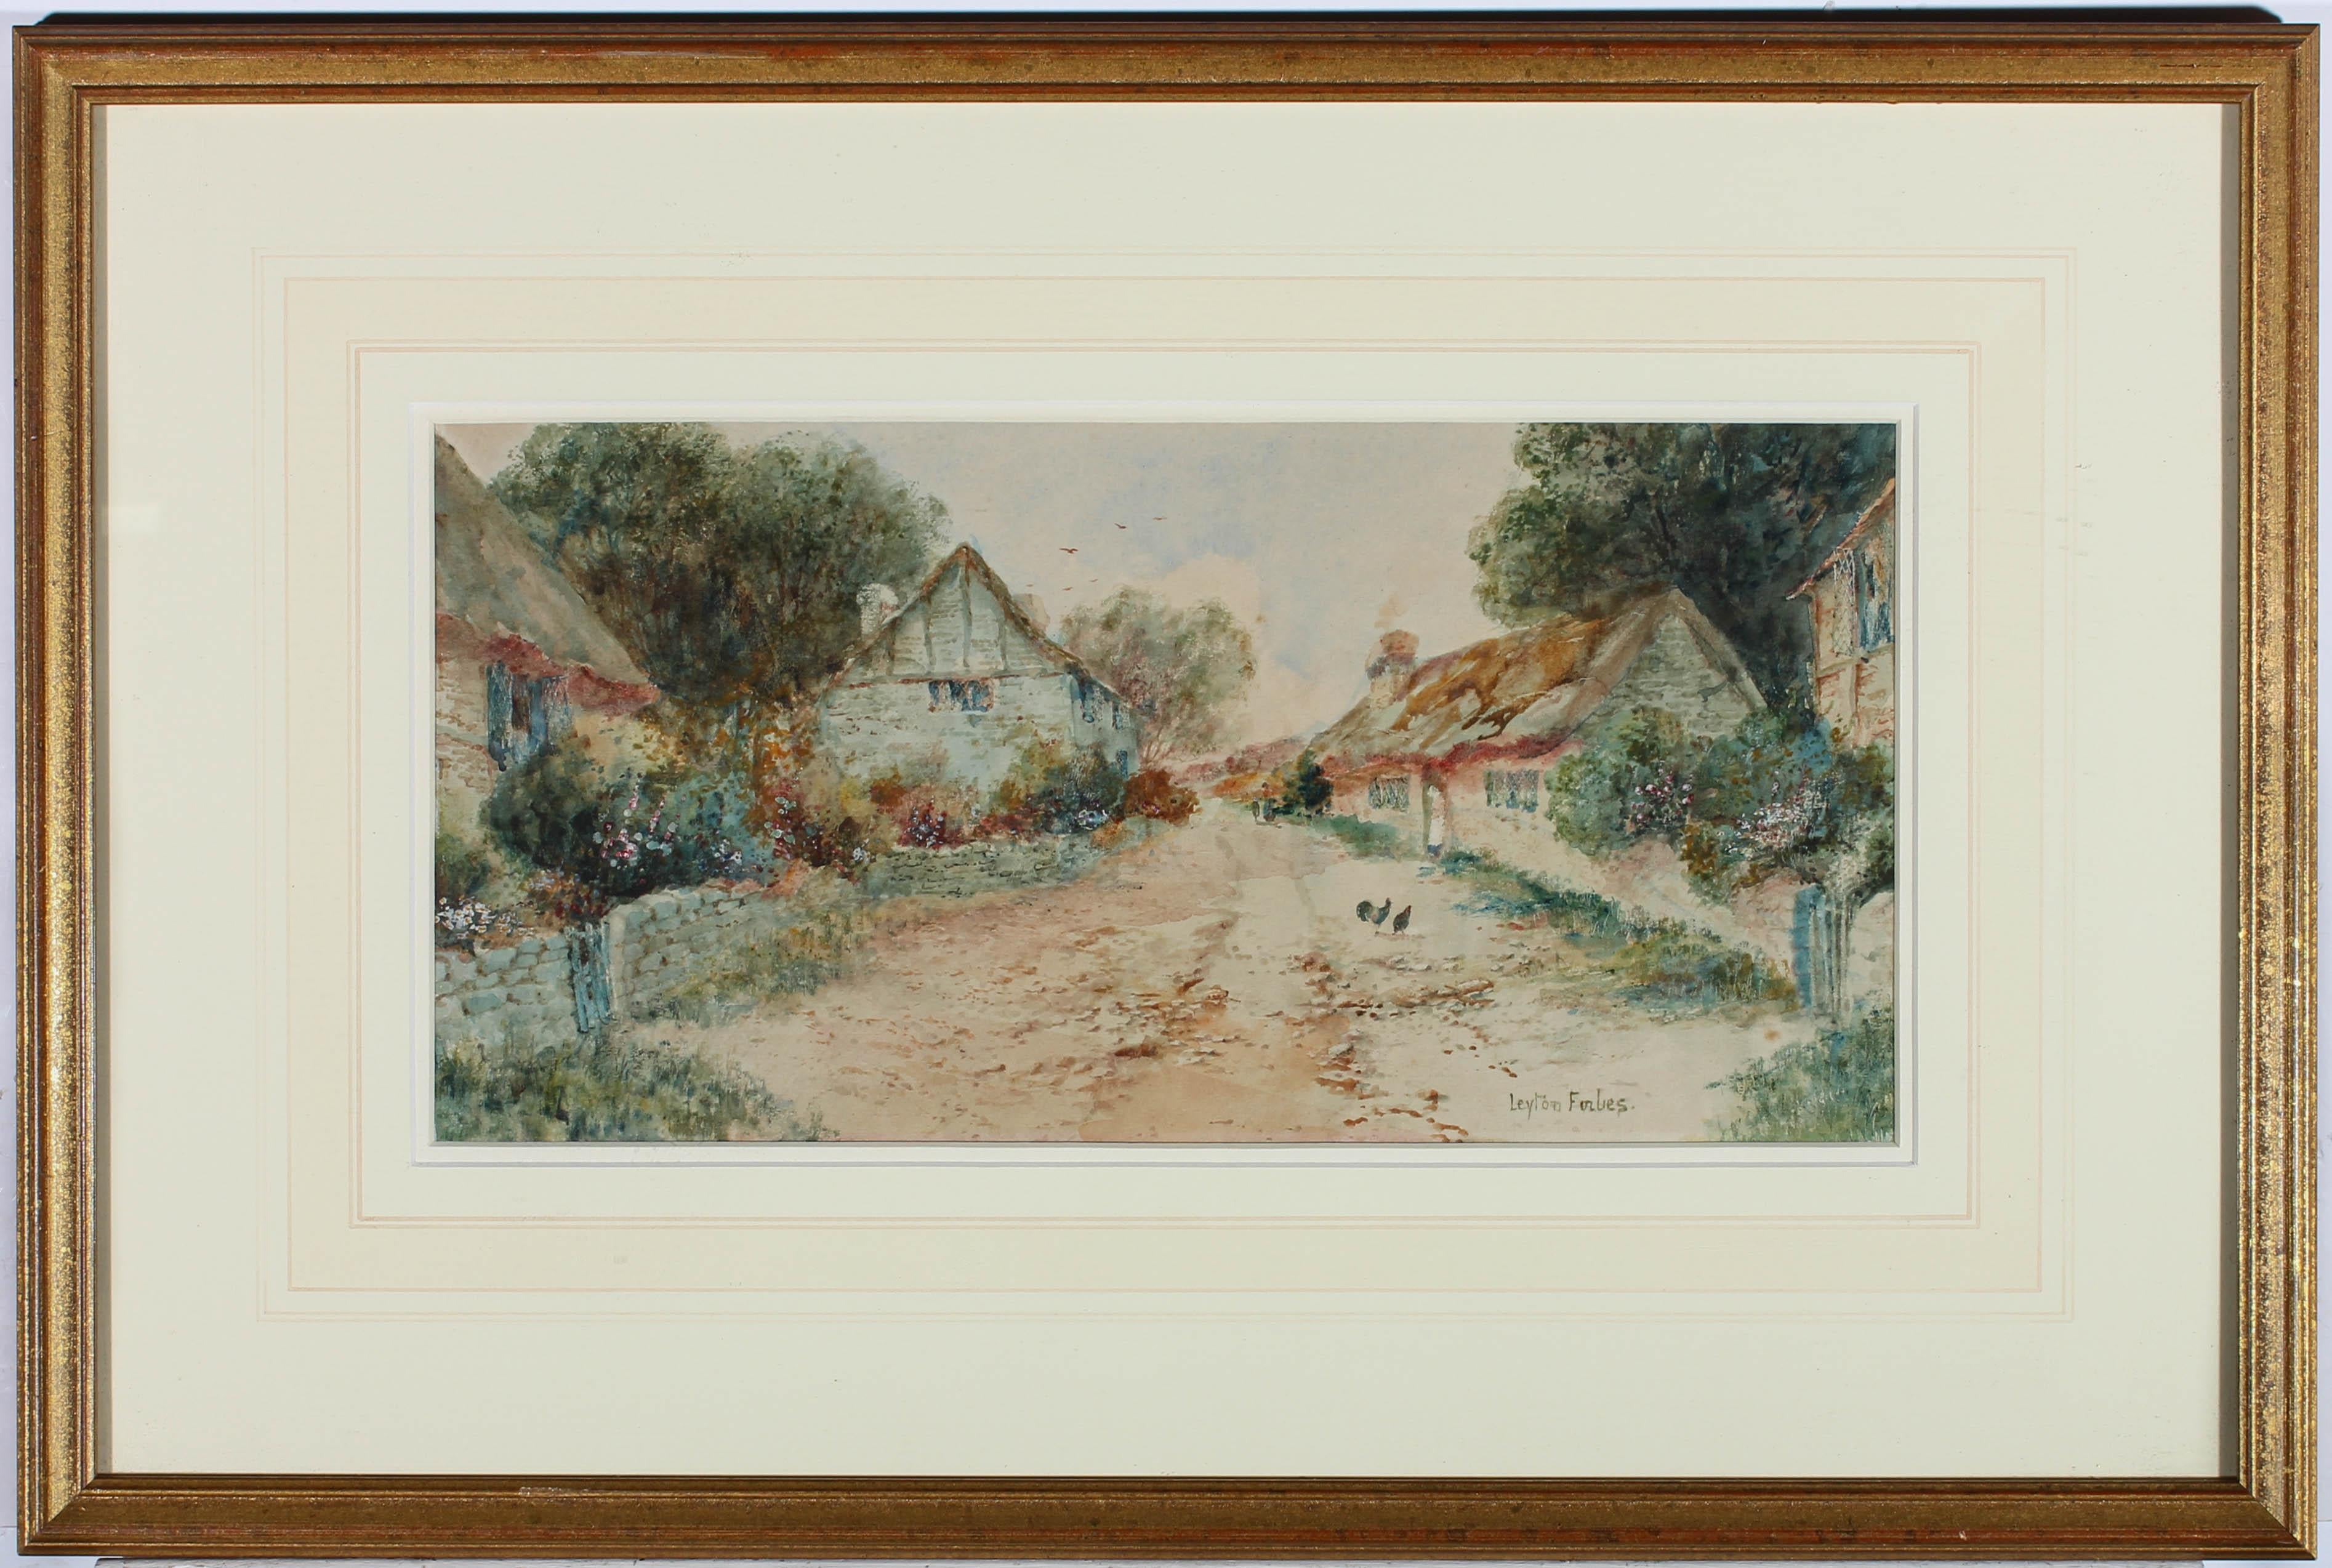 A charming watercolour scene of a quiet village street in the early morning, The only sign of life we can see are two chickens walking across the road. Signed to the lower right and well presented in a wash line mount and gilt frame. On wove.